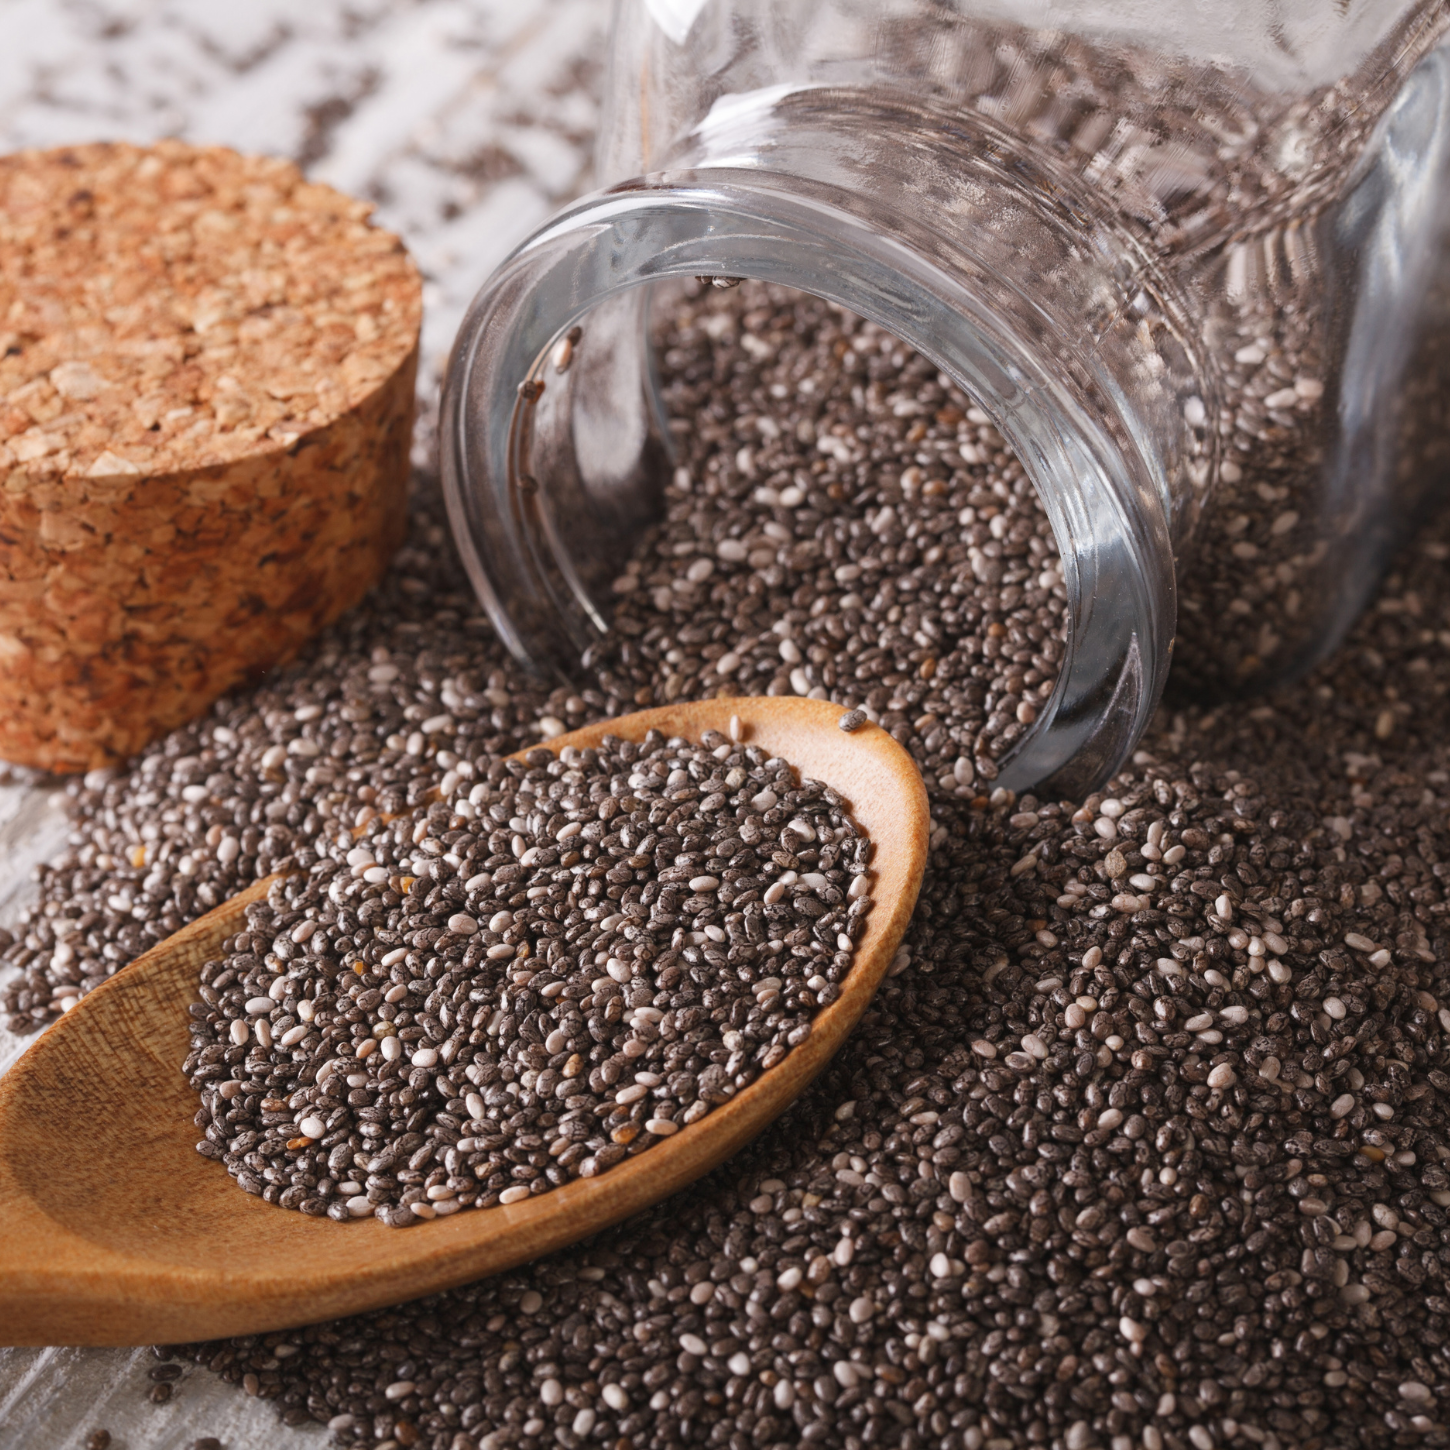 Chia Seeds: The Little Superfoods that Pack a Punch